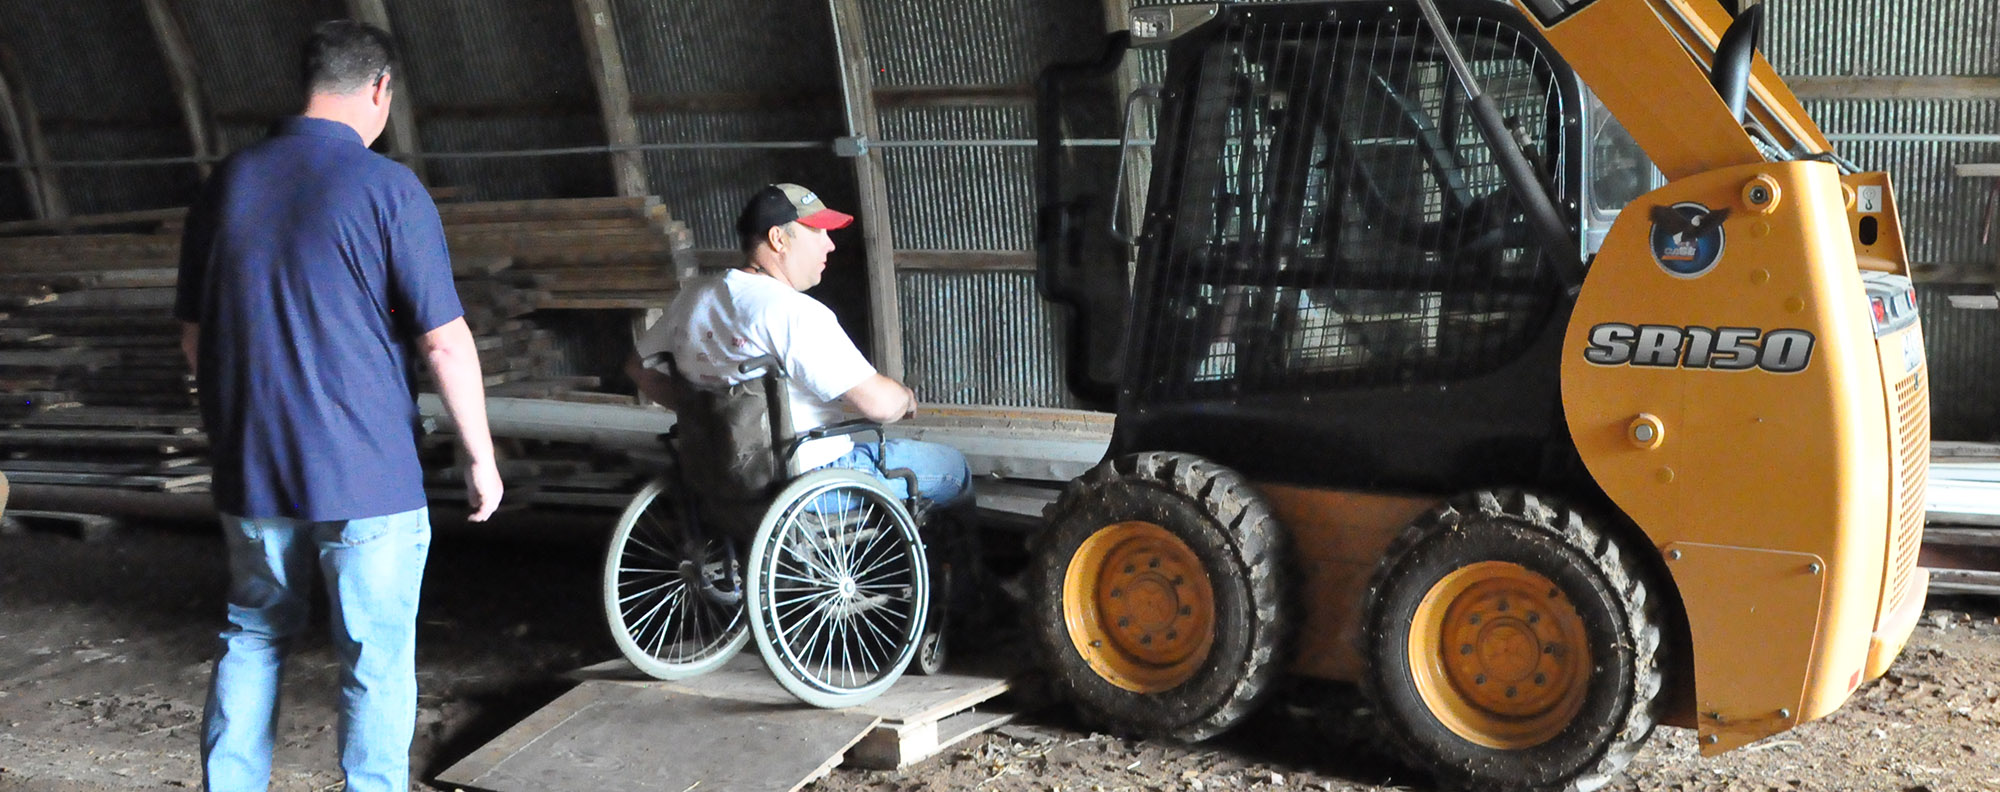 Two farmers, one in a wheelchair, looking at a piece of machinery inside an out building